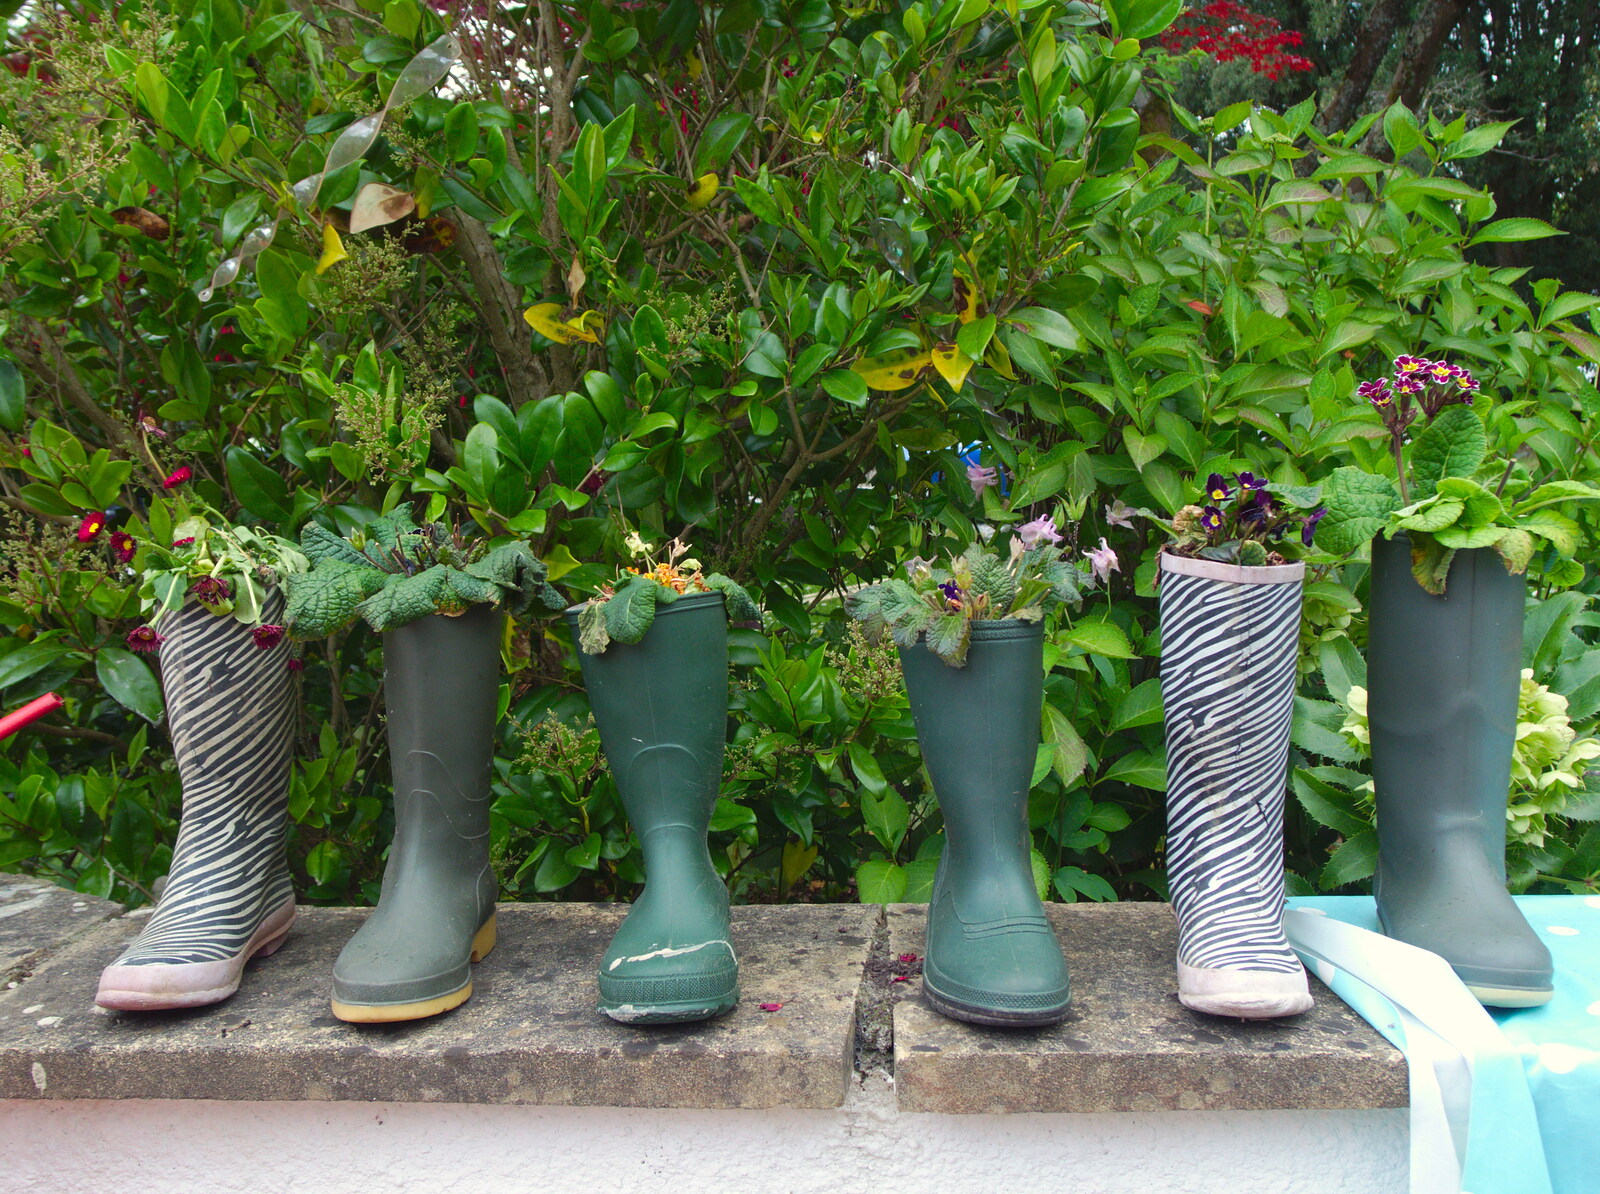 Chagford Lido and a Trip to Parke, Bovey Tracey, Devon - 25th May 2019: Some welly boots have been turned into plant pots